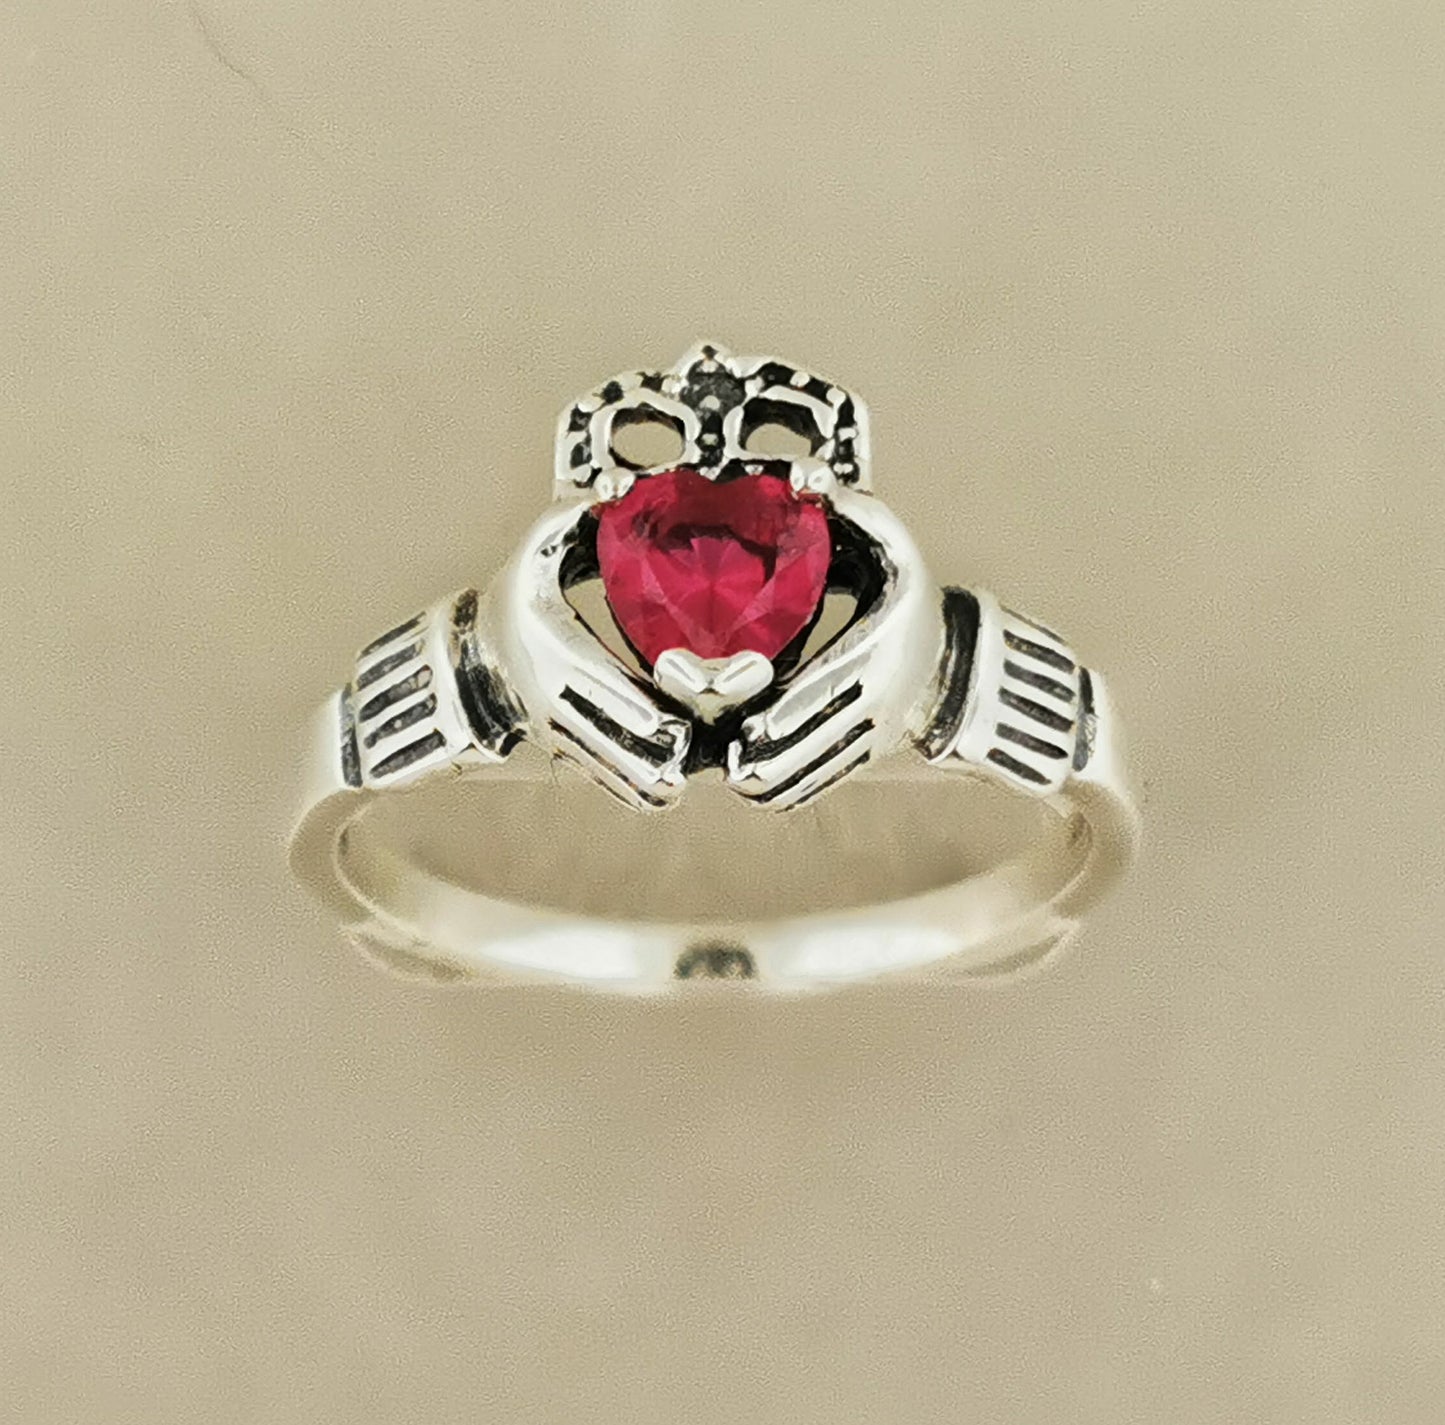 925 Silver Claddagh Ring with Synthetic Ruby, Irish Claddagh Ring with Ruby Heart, Celtic Claddagh Ring Gift For Her, Ladies Irish Love Ring, Sterling Silver Claddagh Ring with Chatham Ruby Heart